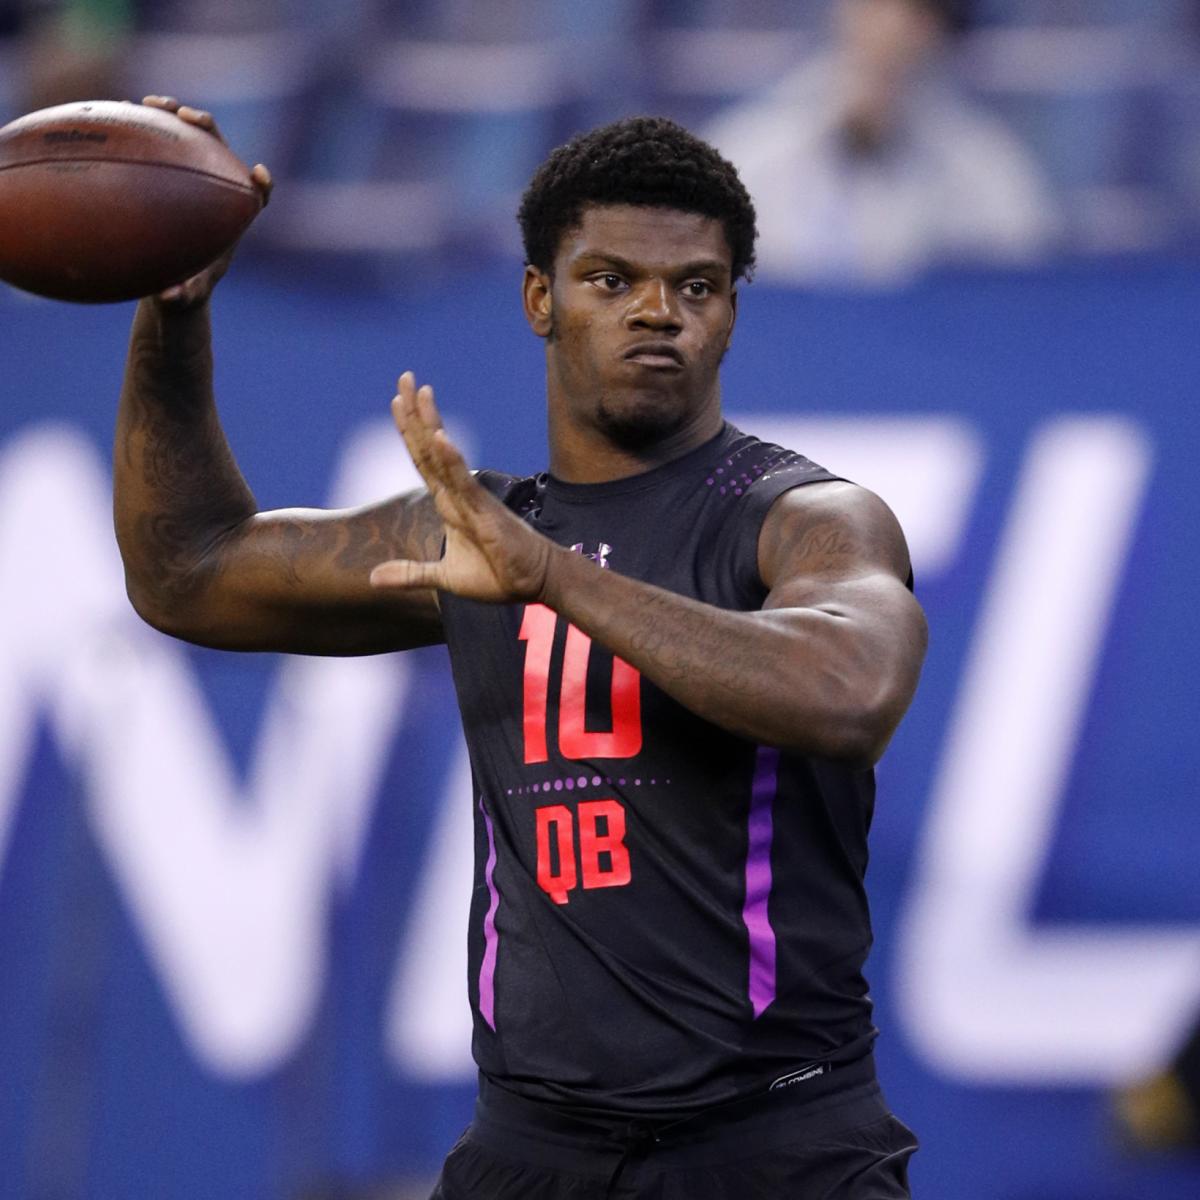 2018 NFL Draft Rumors: Lamar Jackson Expected to Be Among 5 QBs Picked in Top 20